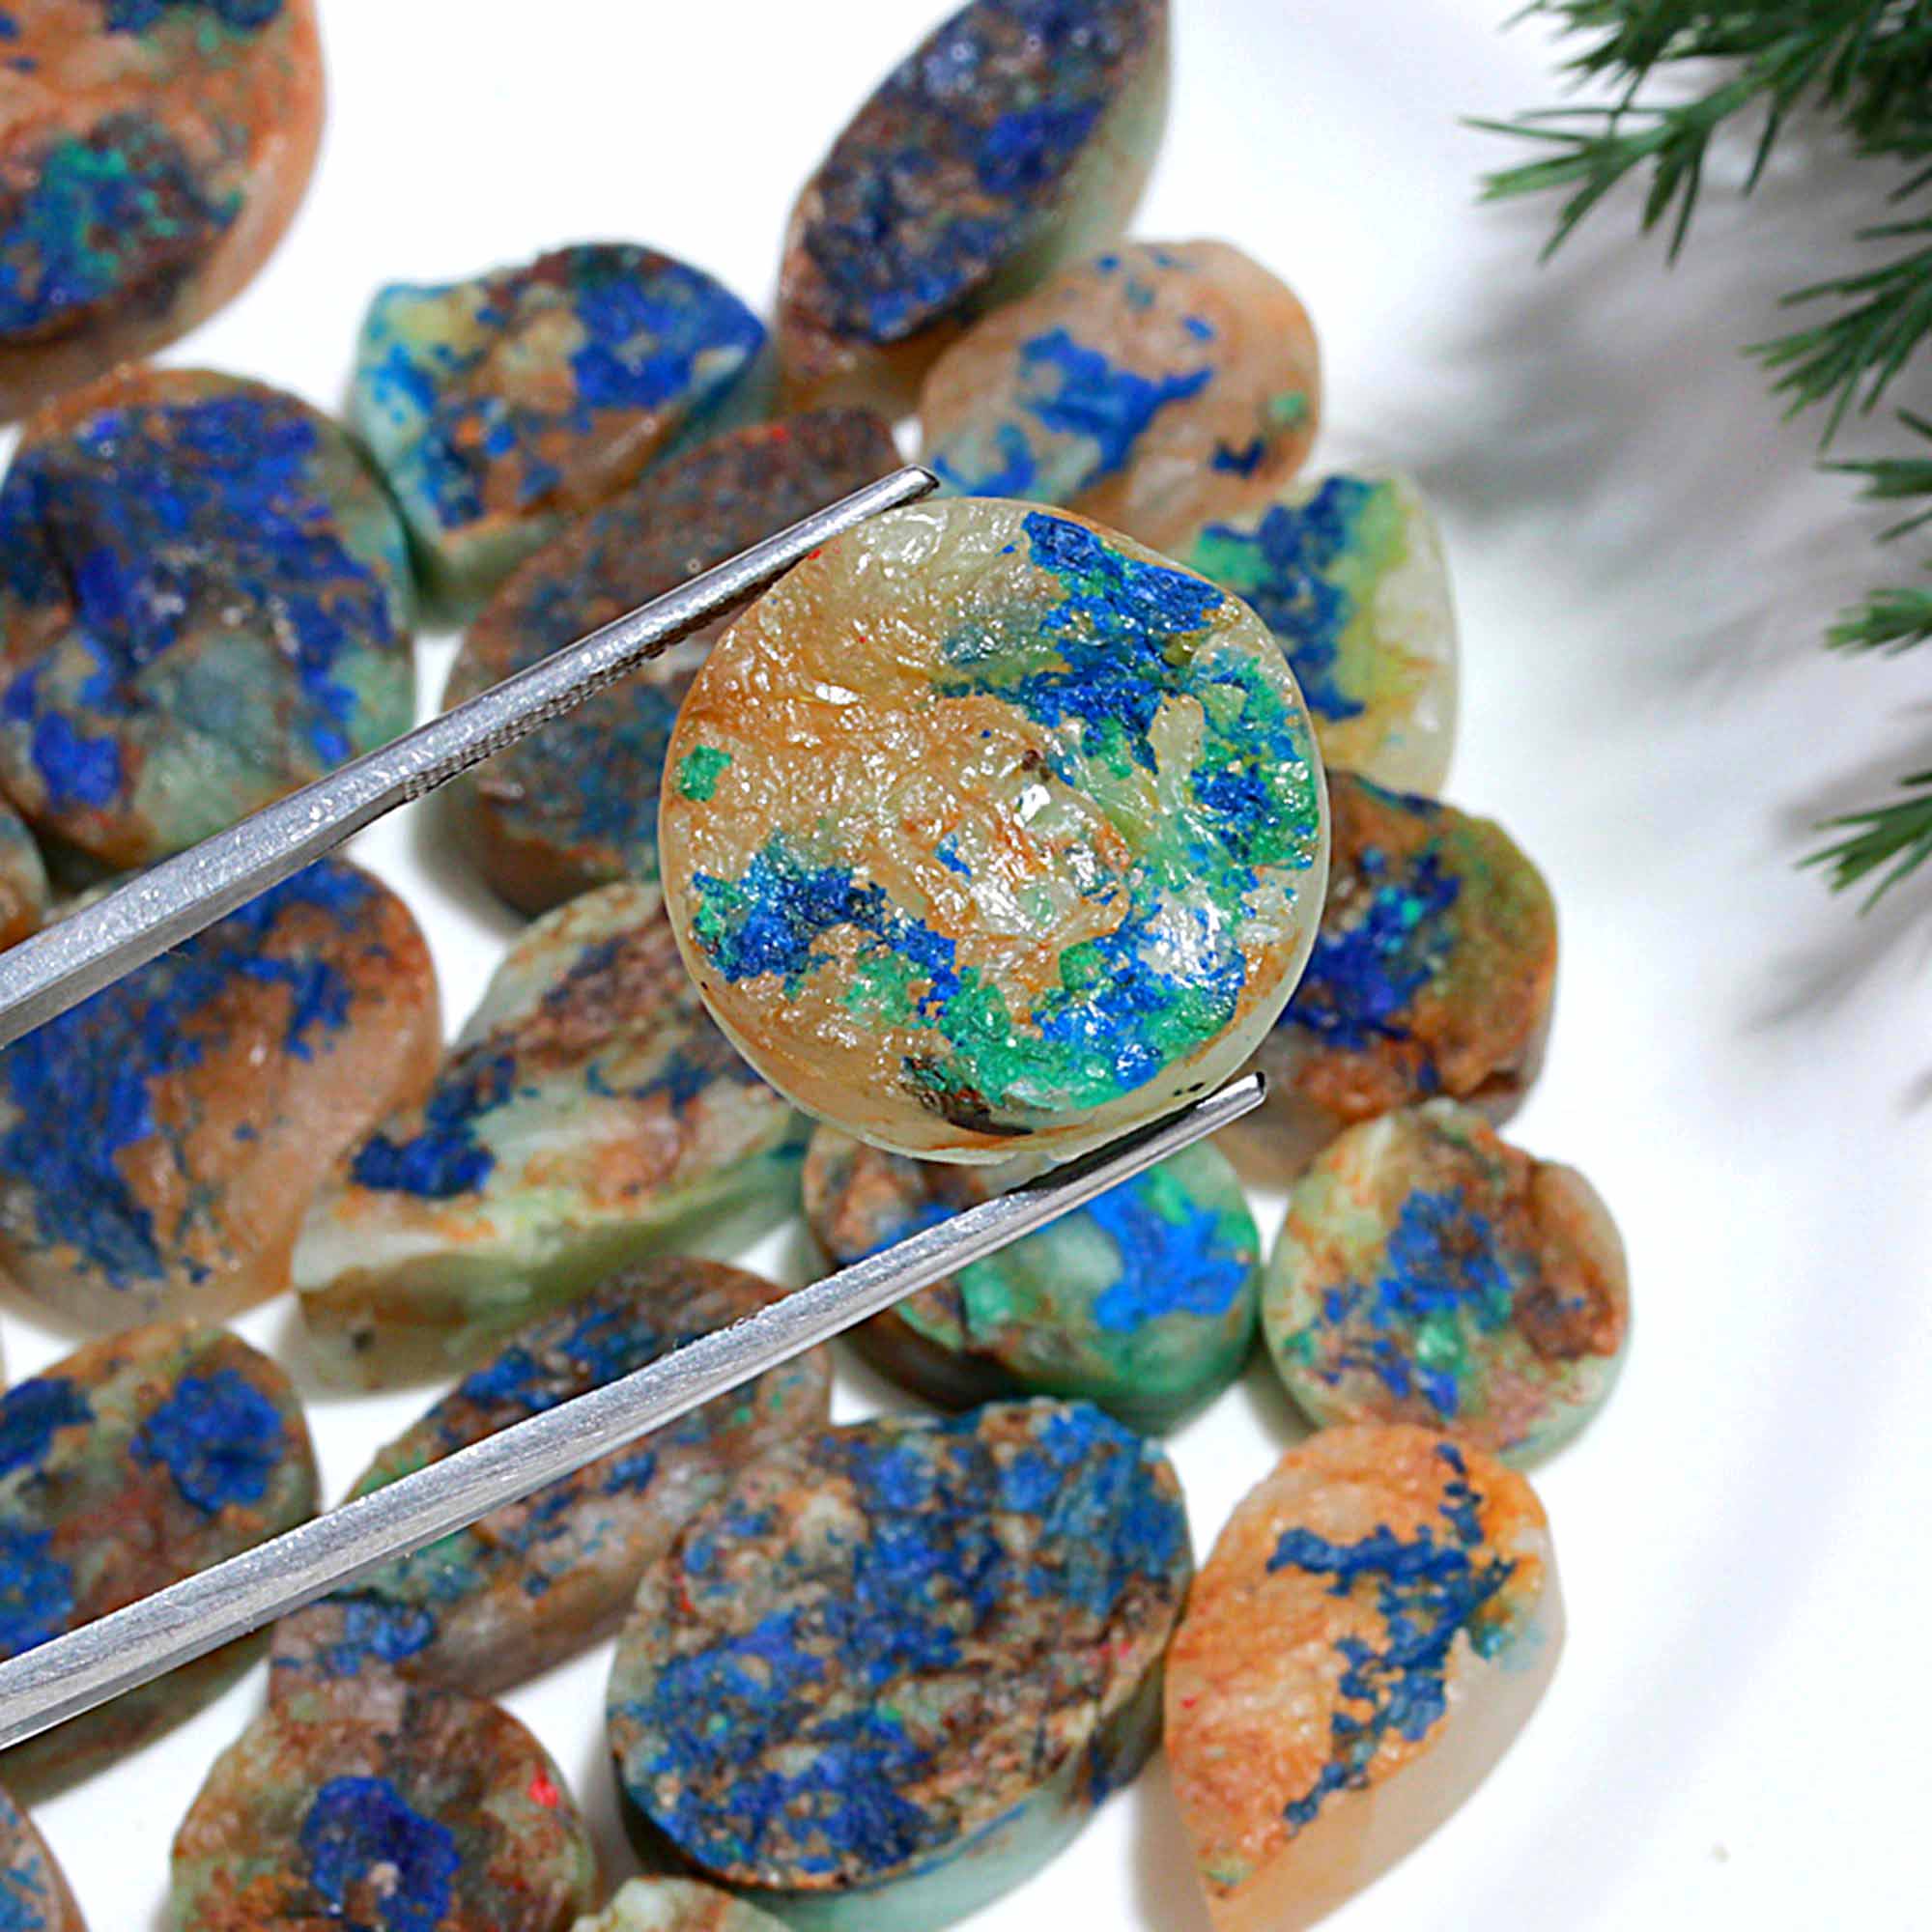 40 Pcs 552.Cts Natural Azurite Druzy Unpolished Loose Cabochon Gemstone For Jewelry Wholesale Lot Size 30x27 13x13mm